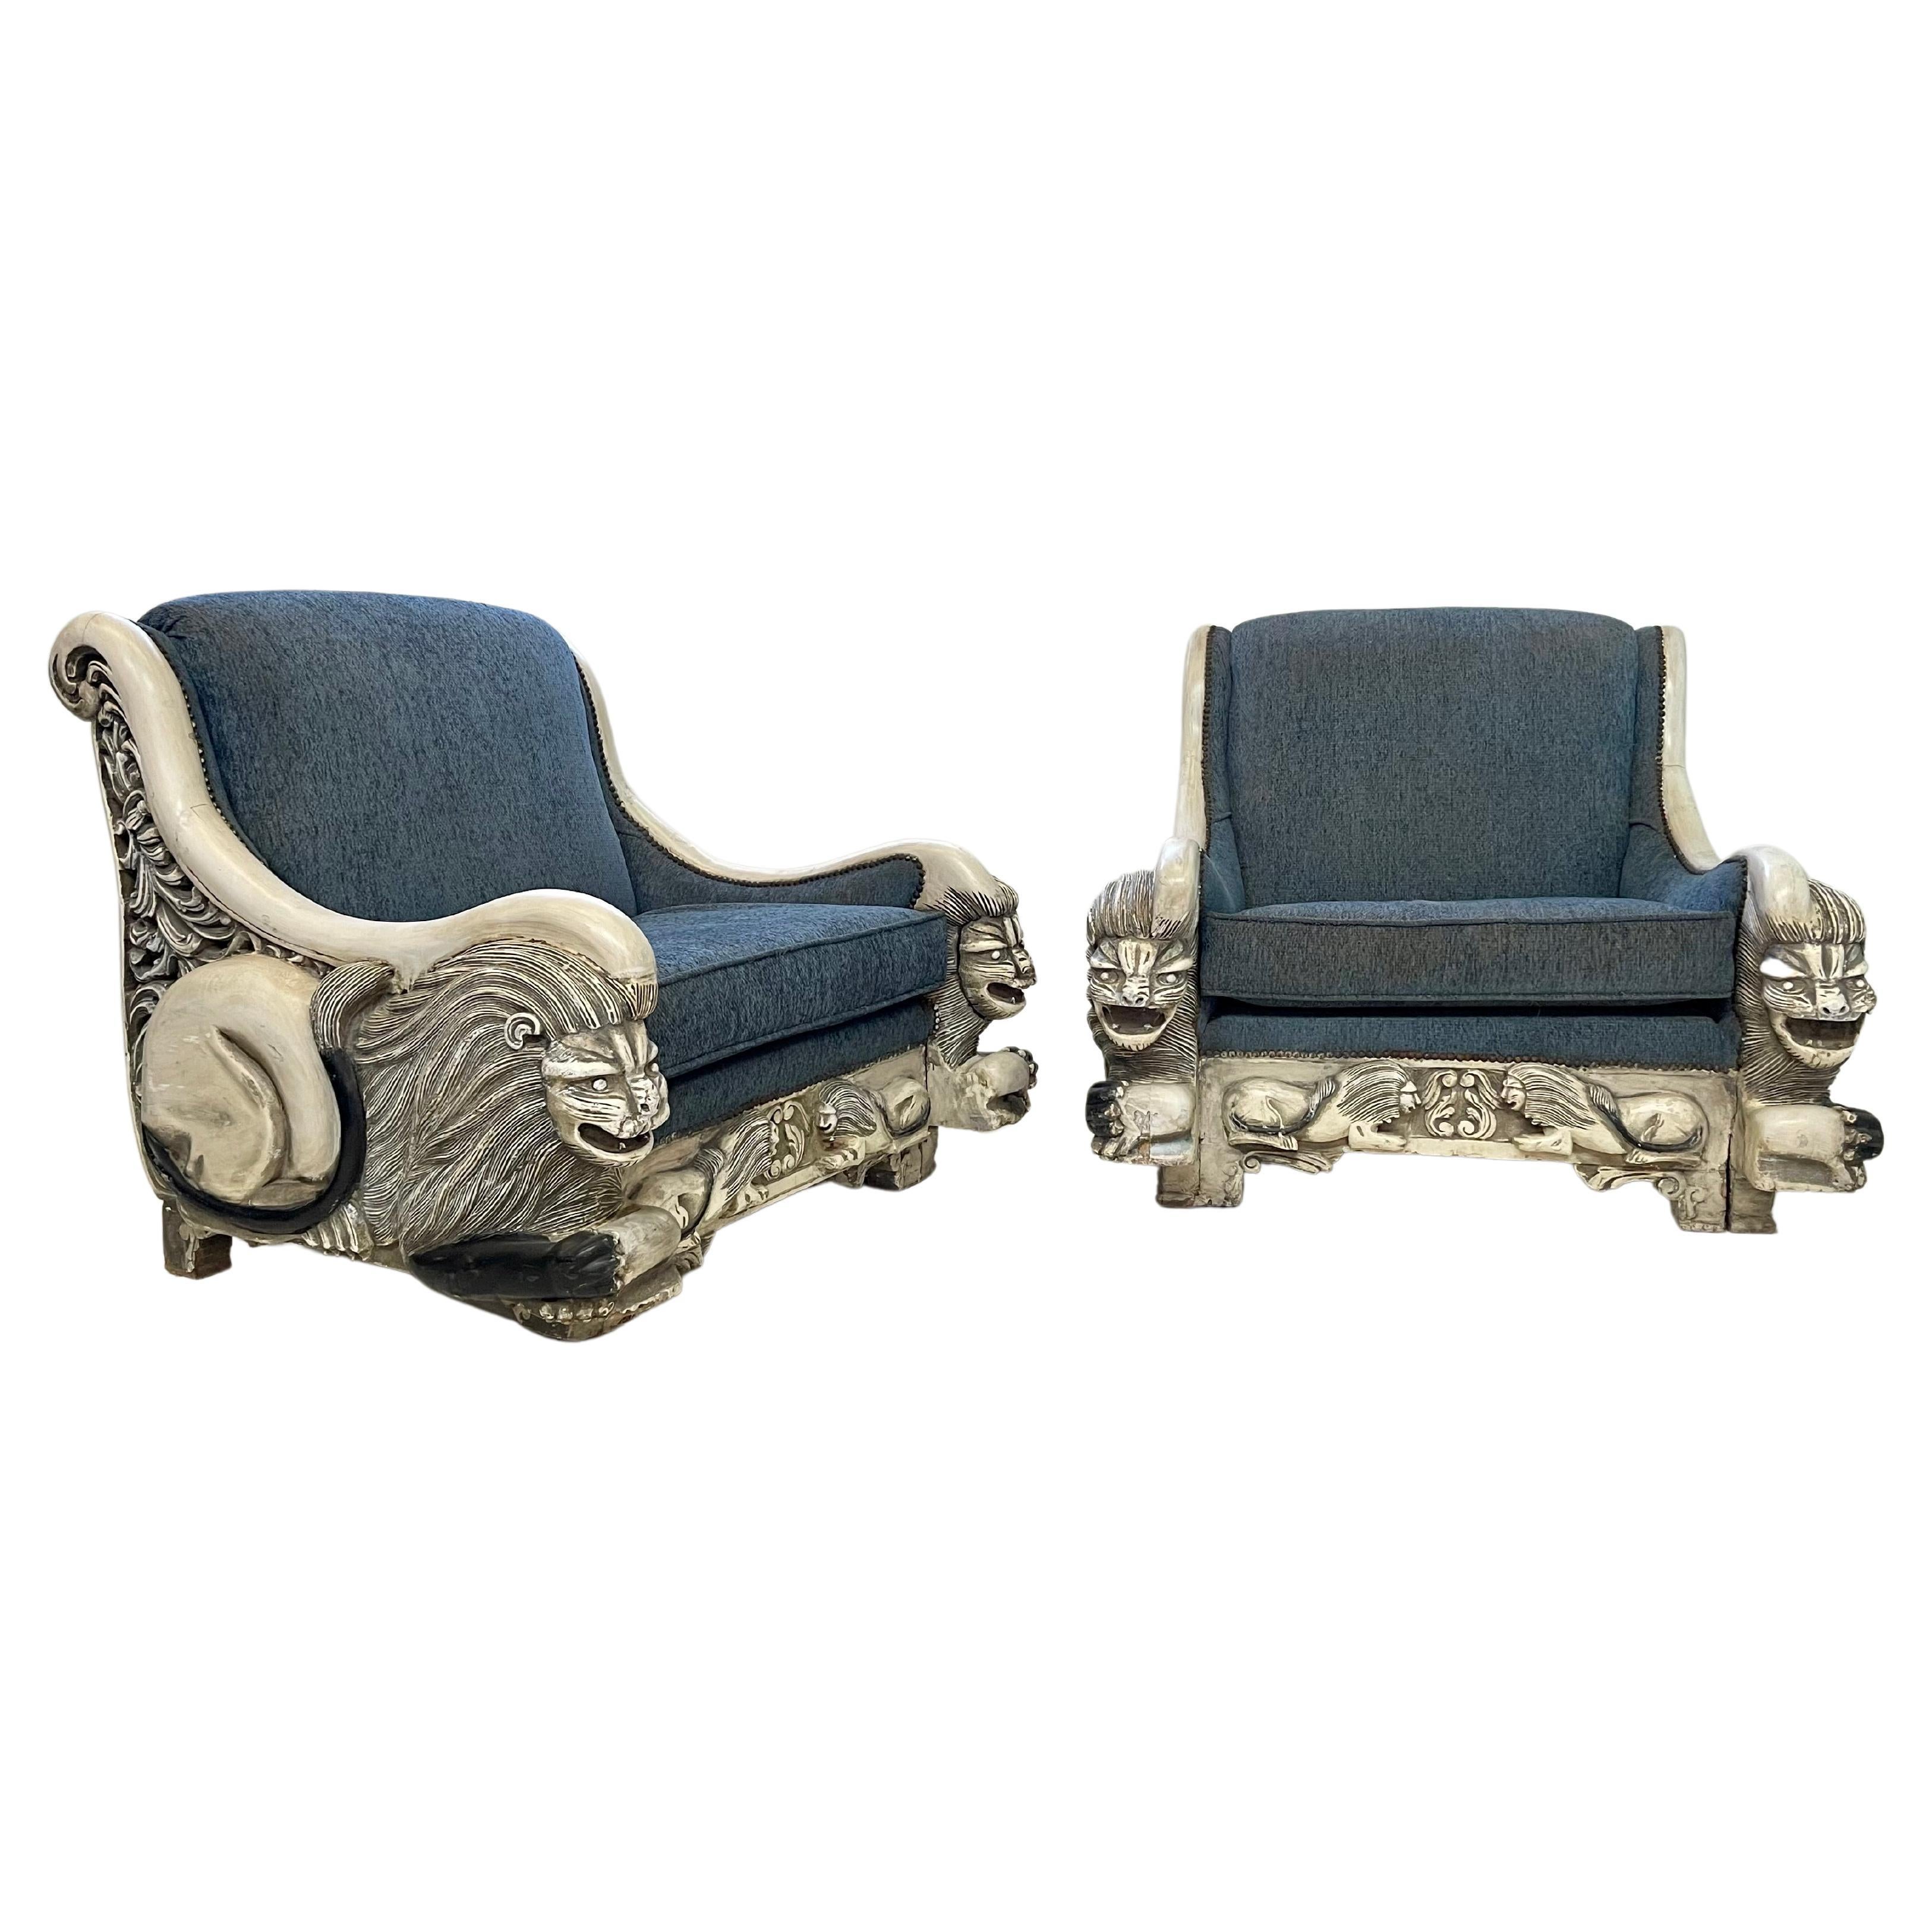 Pair of Italian Art Deco Lounge Chairs with Lion Carved Arms